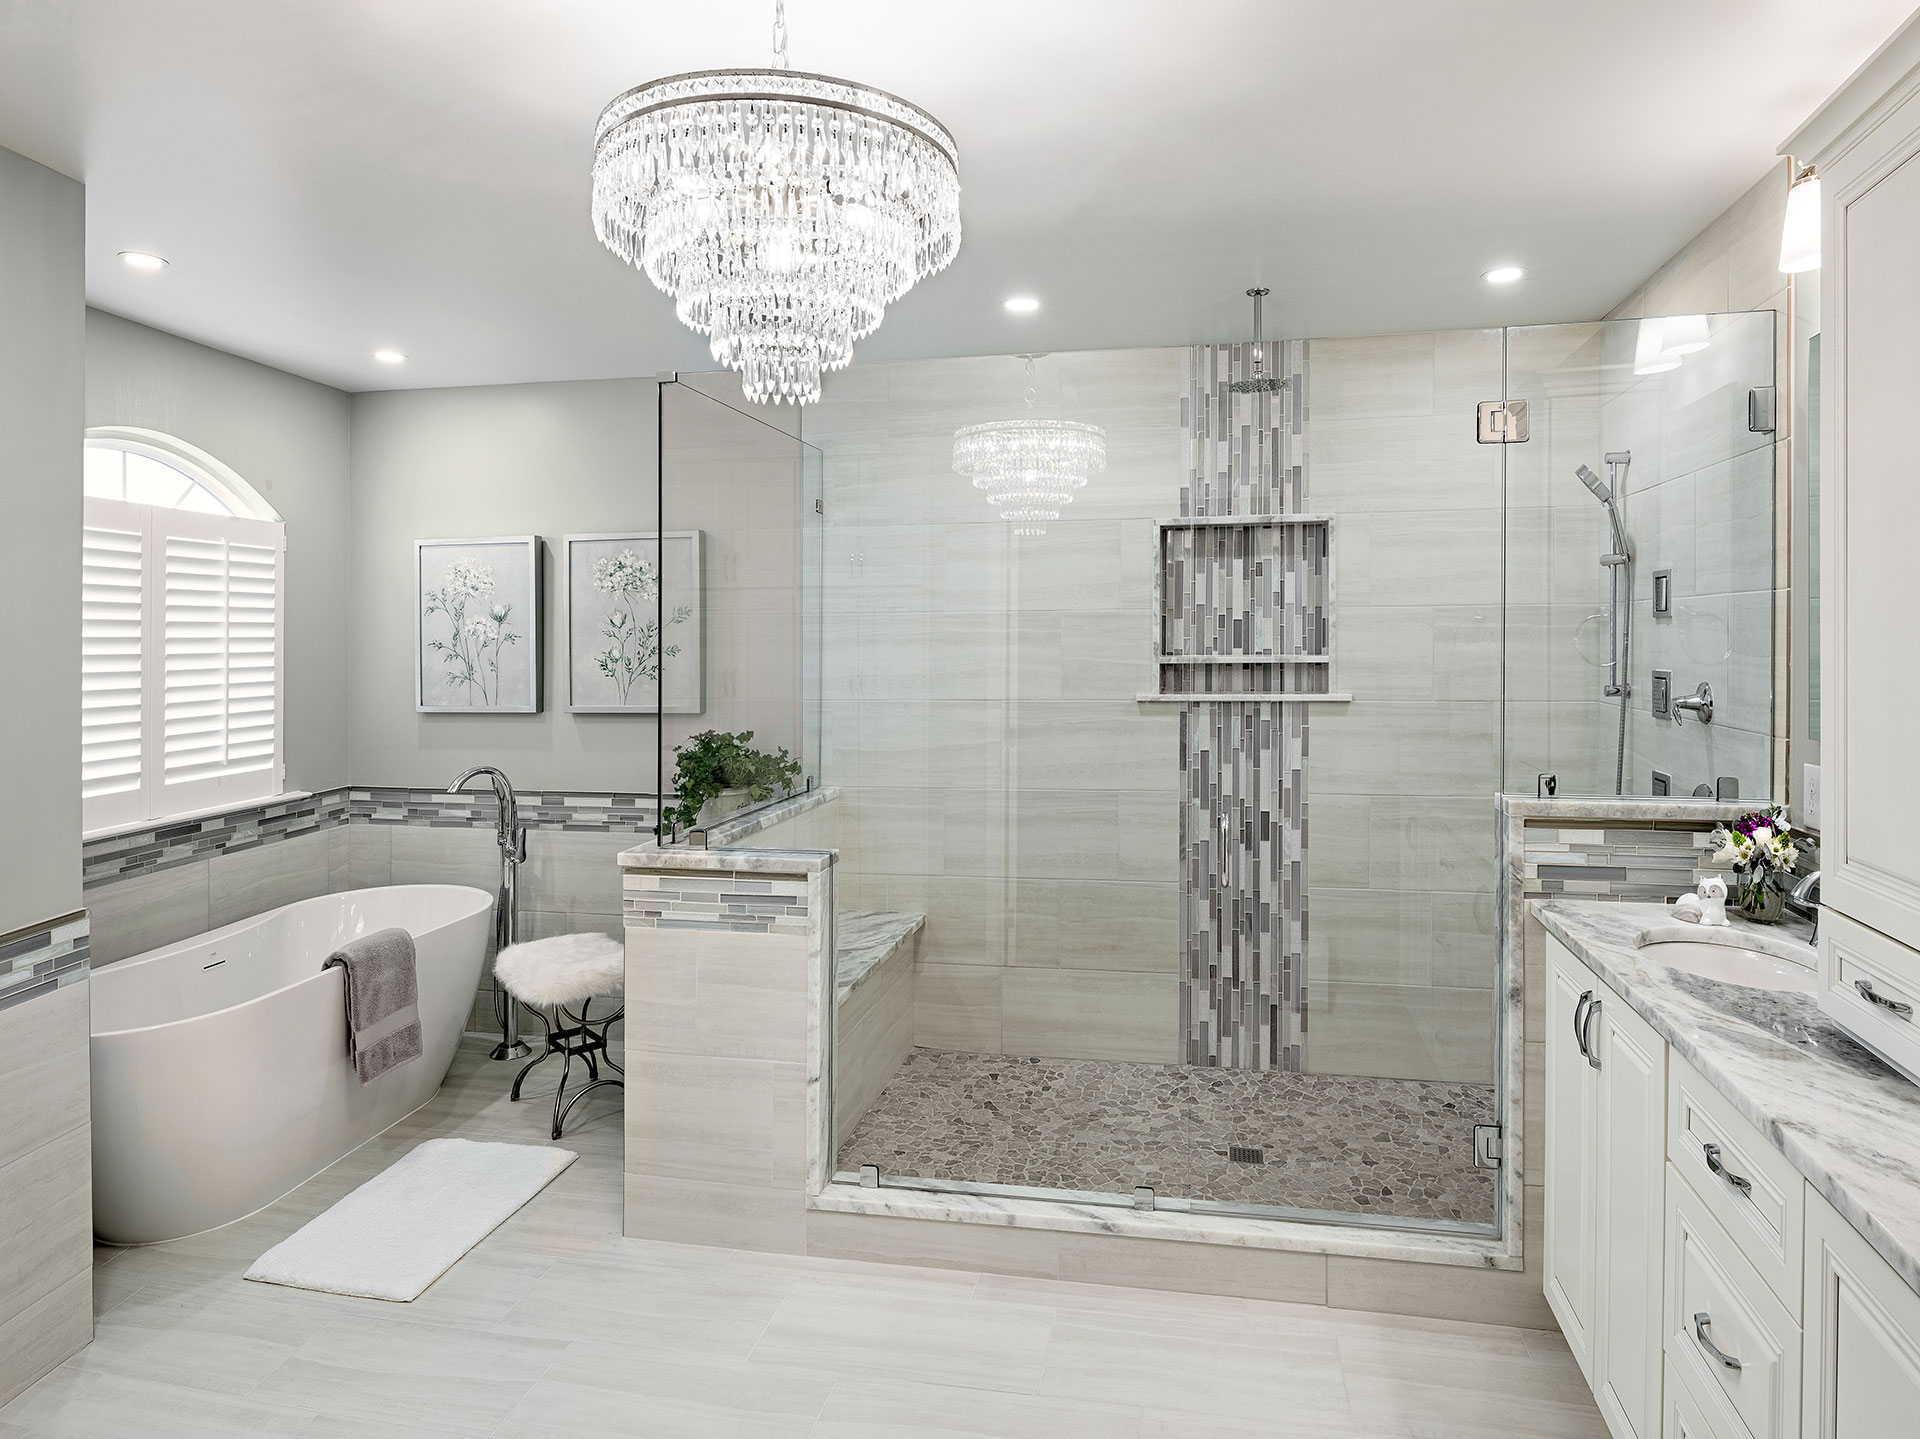 A photo of a luxurious and sleek bathroom with a freestanding bathtub, a glass-enclosed shower, a modern vanity with double sinks, and marble tiles on the walls and floor.